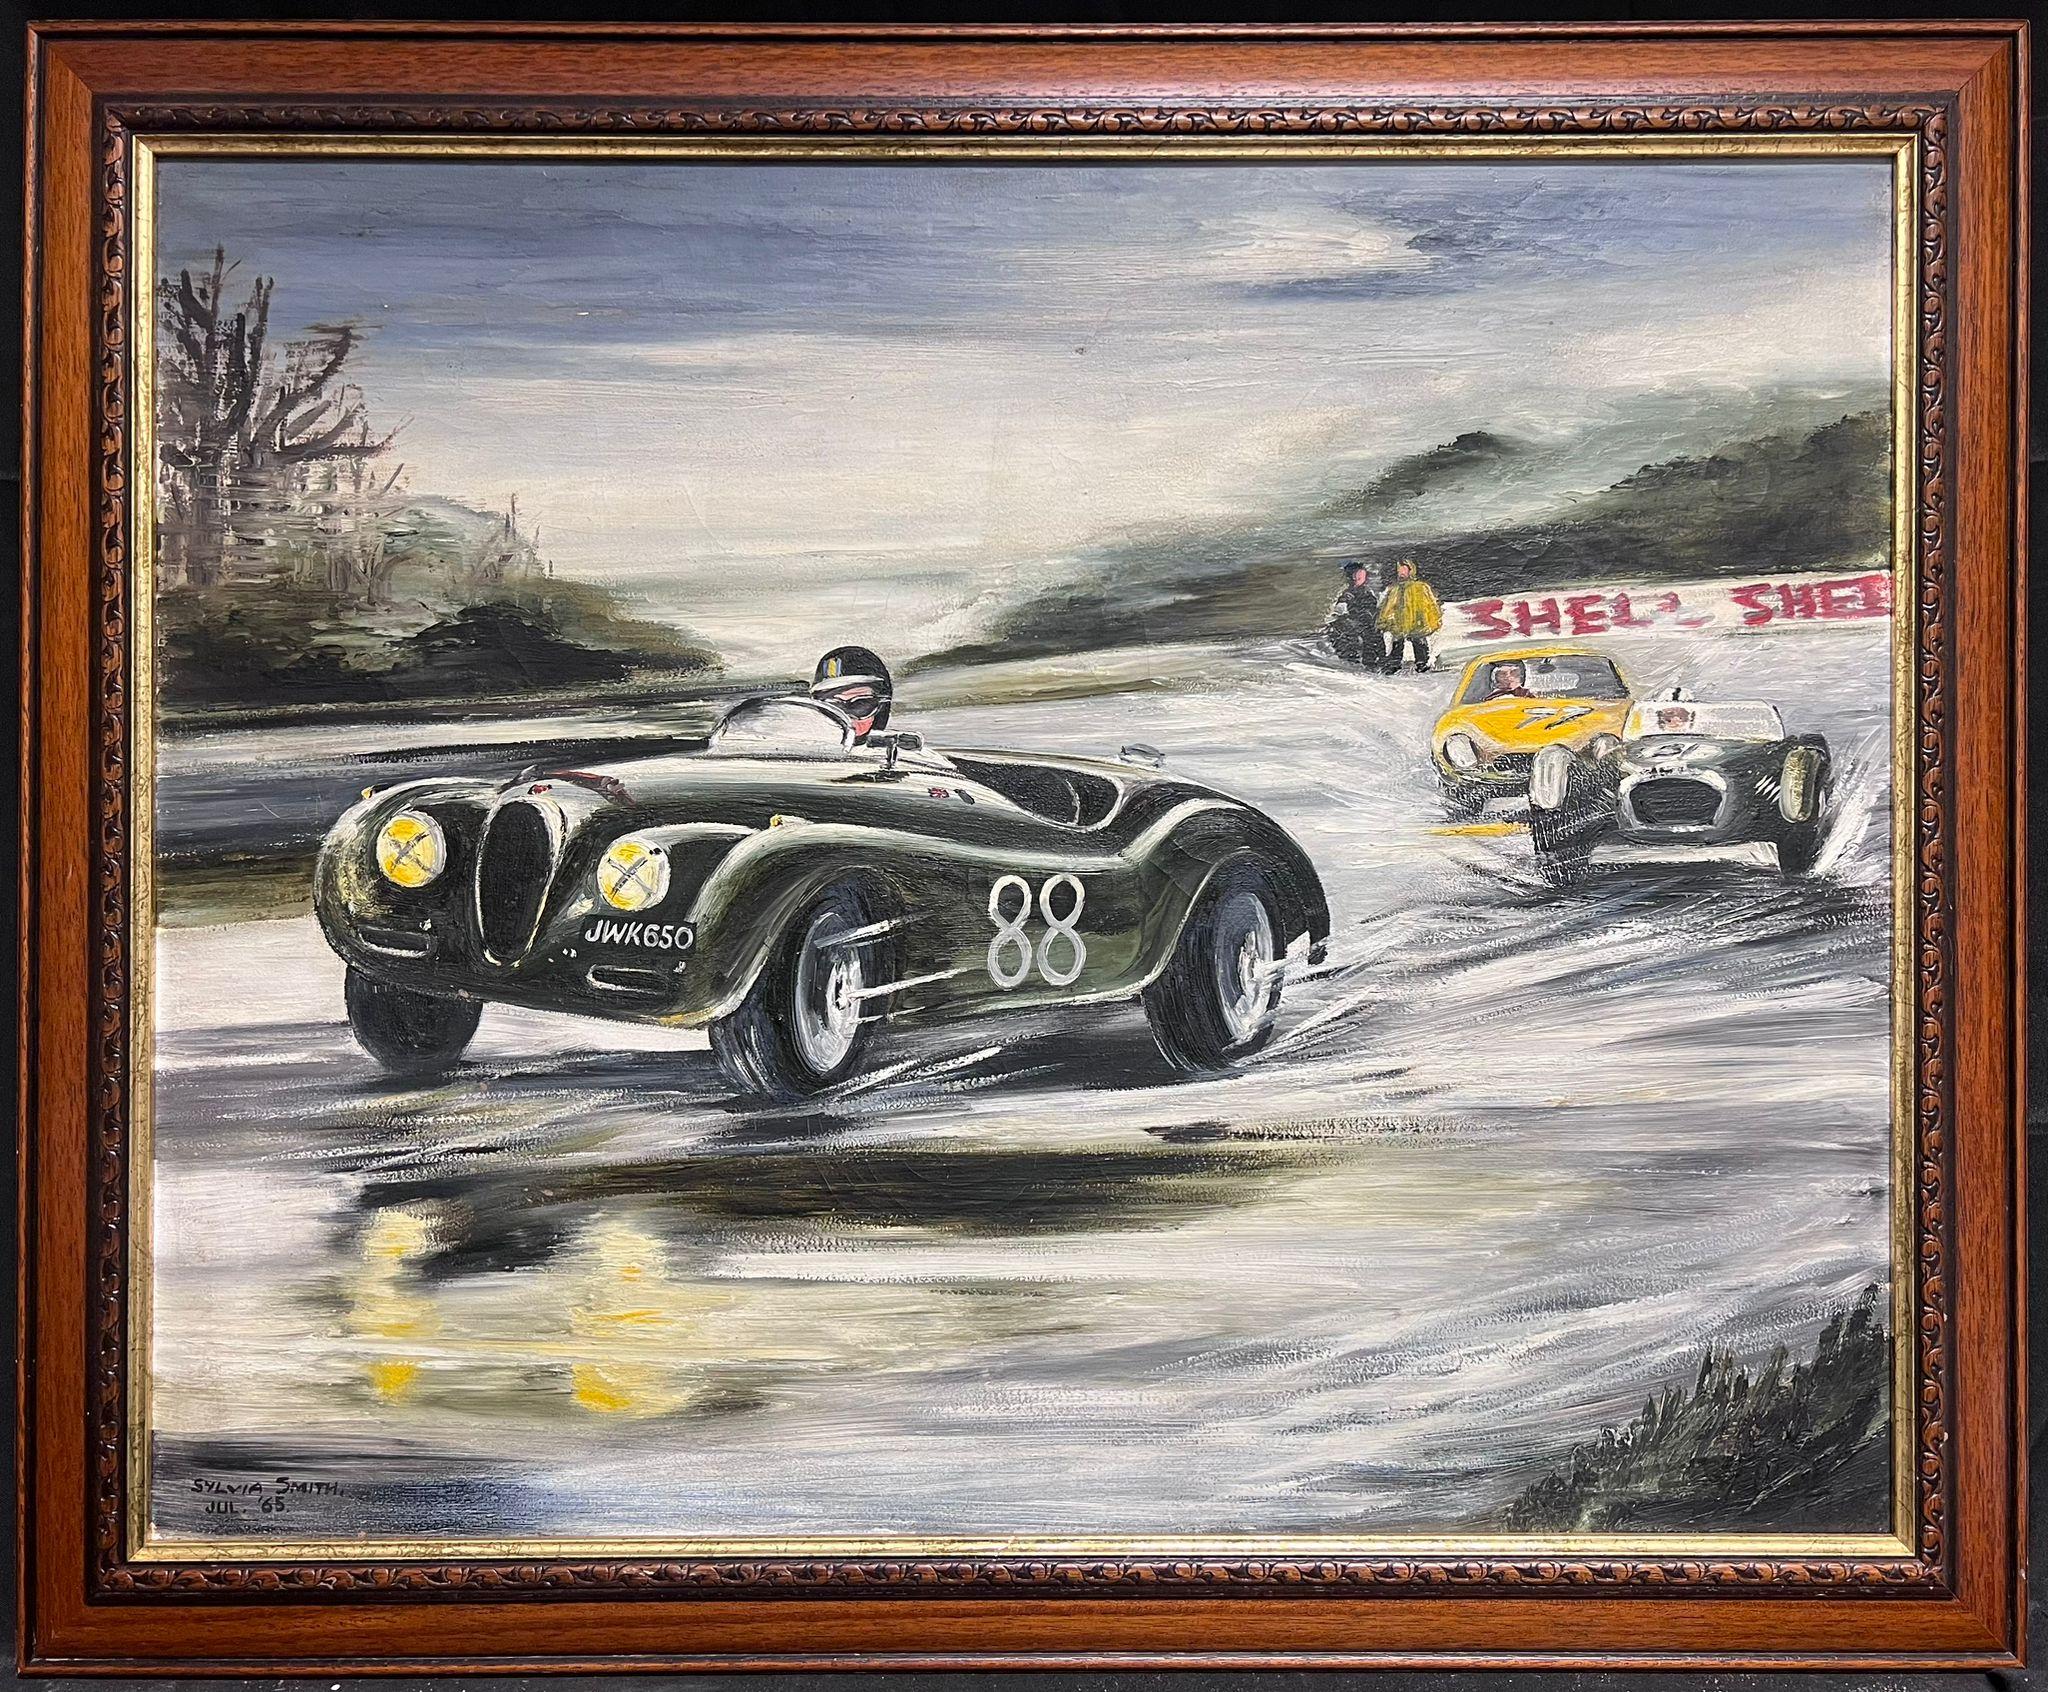 Jaguar Motor Racing
Sylvia Smith (British 20th century). 
signed and dated Jul. 65'
oil on canvas, framed
framed: 28.5 x 34.5 inches
canvas: 24 x 30 inches
provenance: private collection, UK
condition: very good and sound condition 